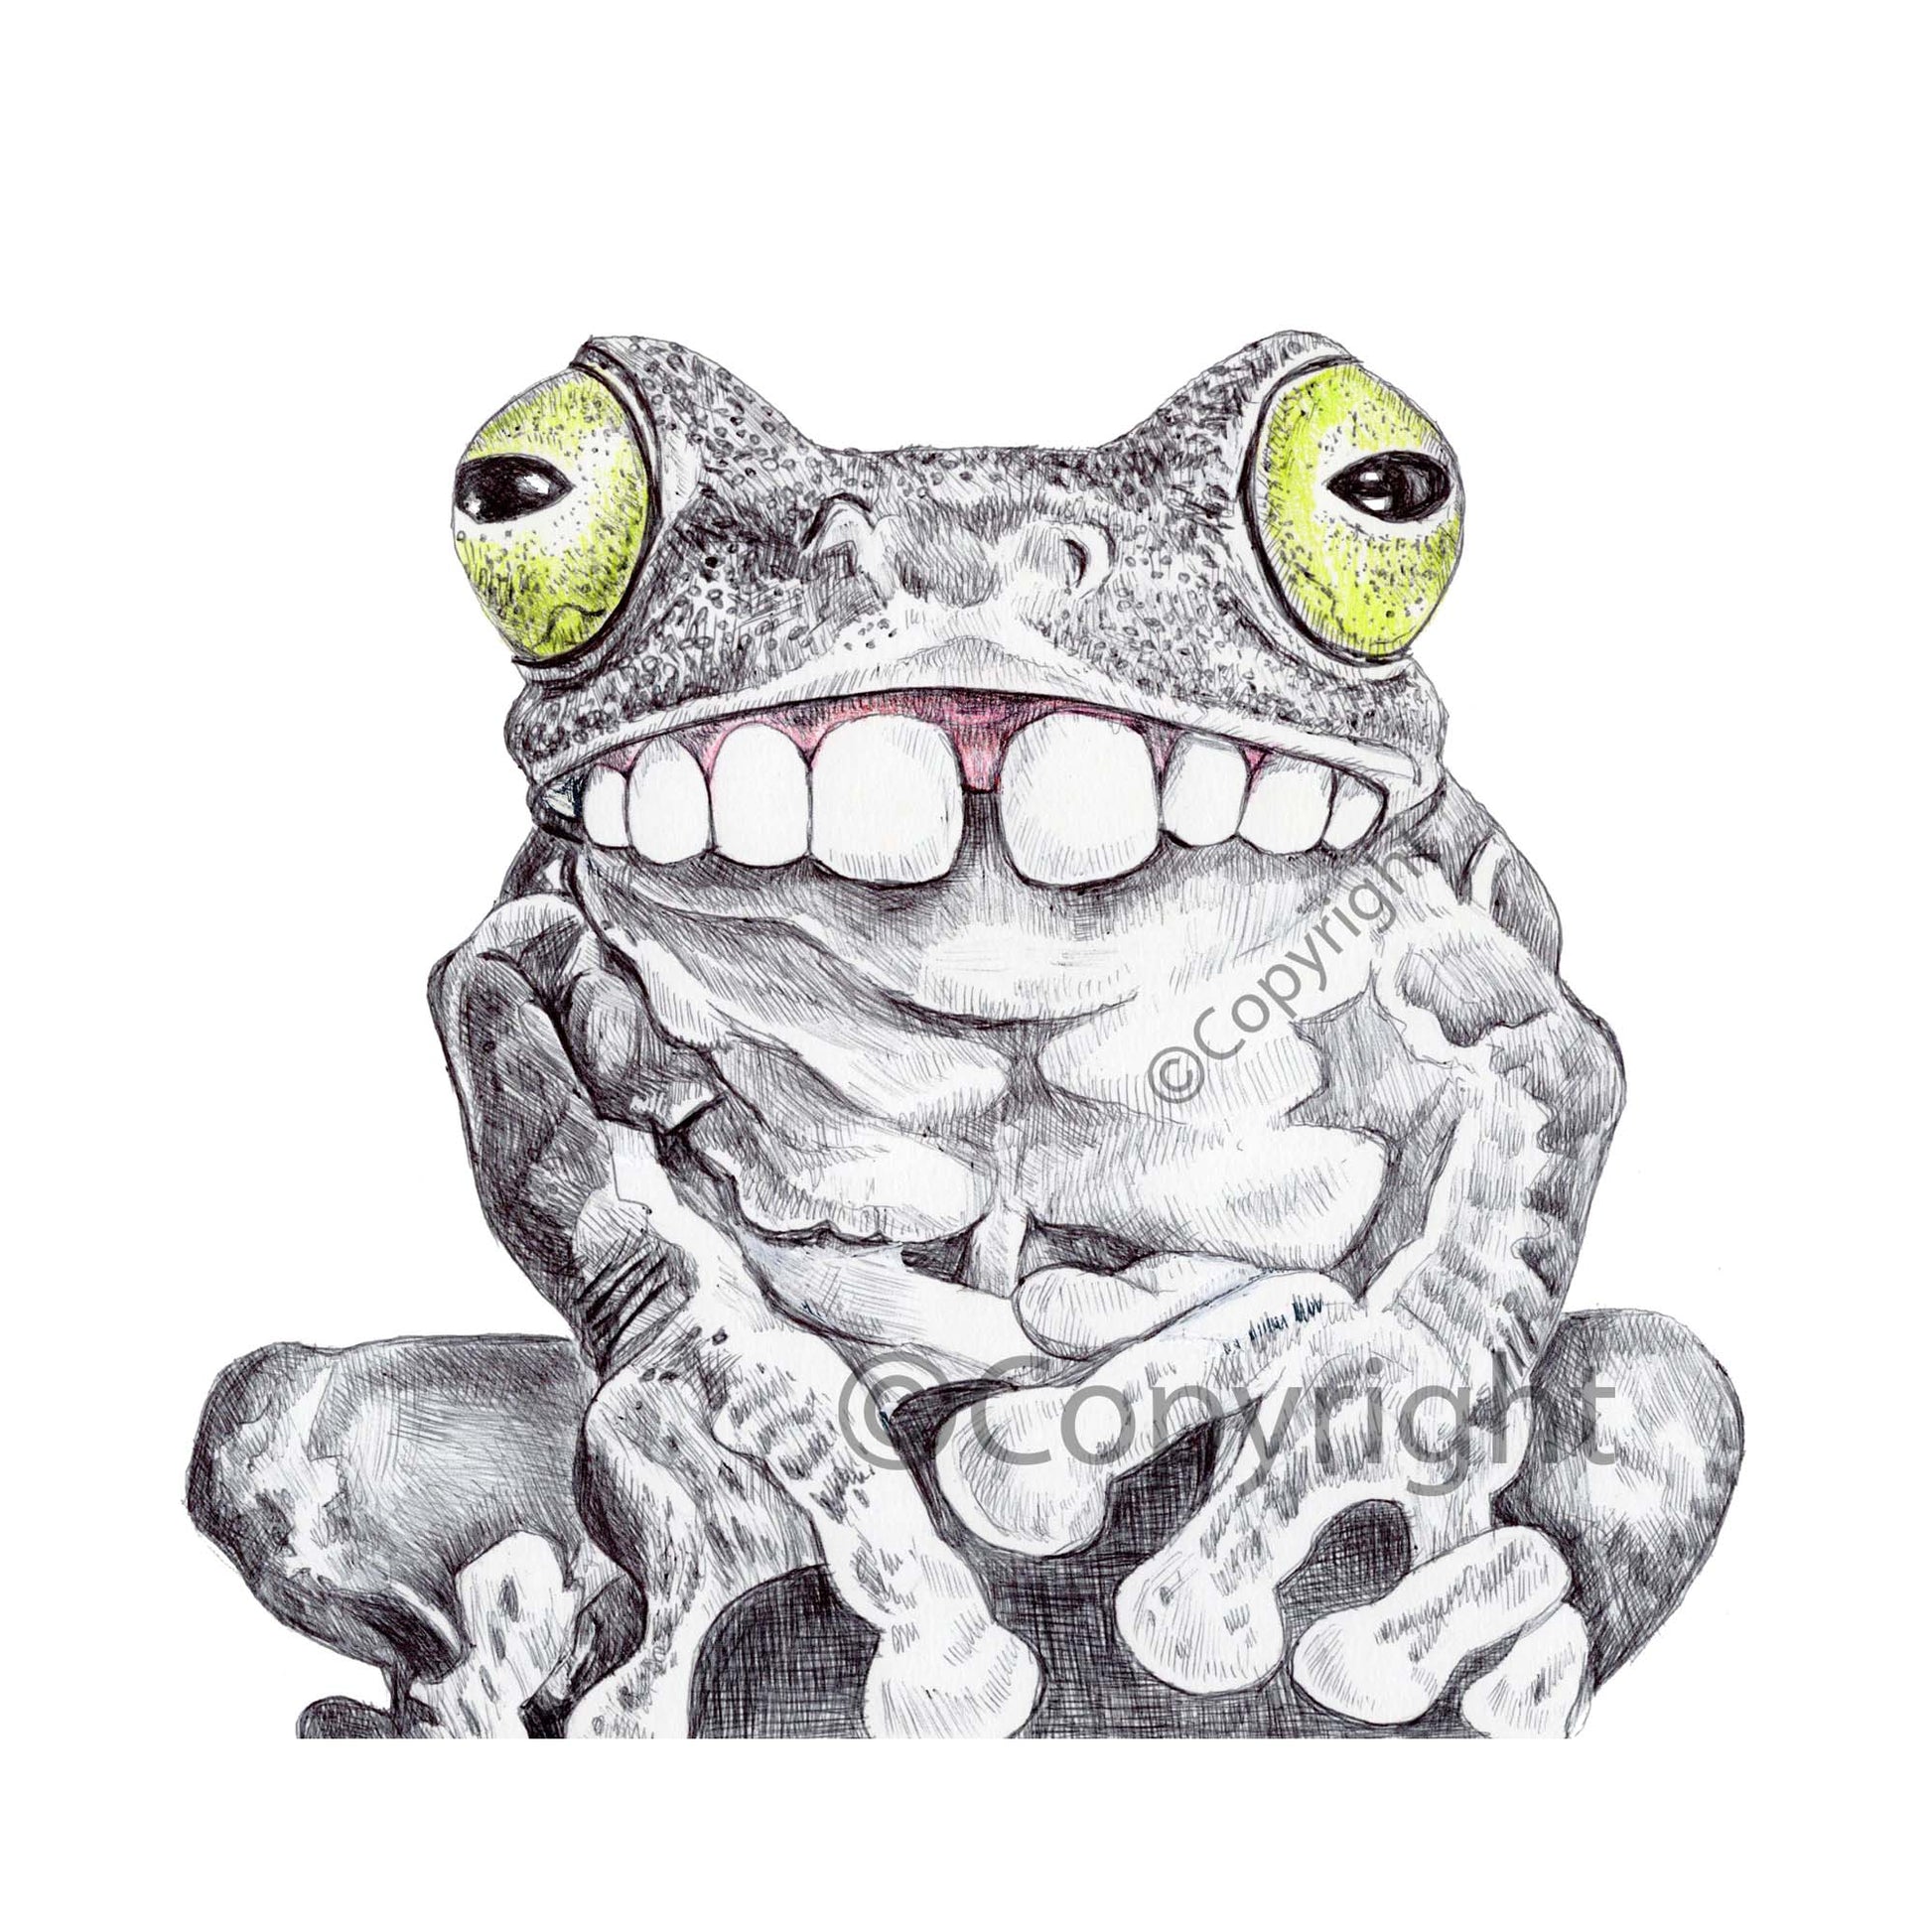 Ballpoint pen drawing of a tree frog with a big gap tooth smile. Art by Deidre Wicks